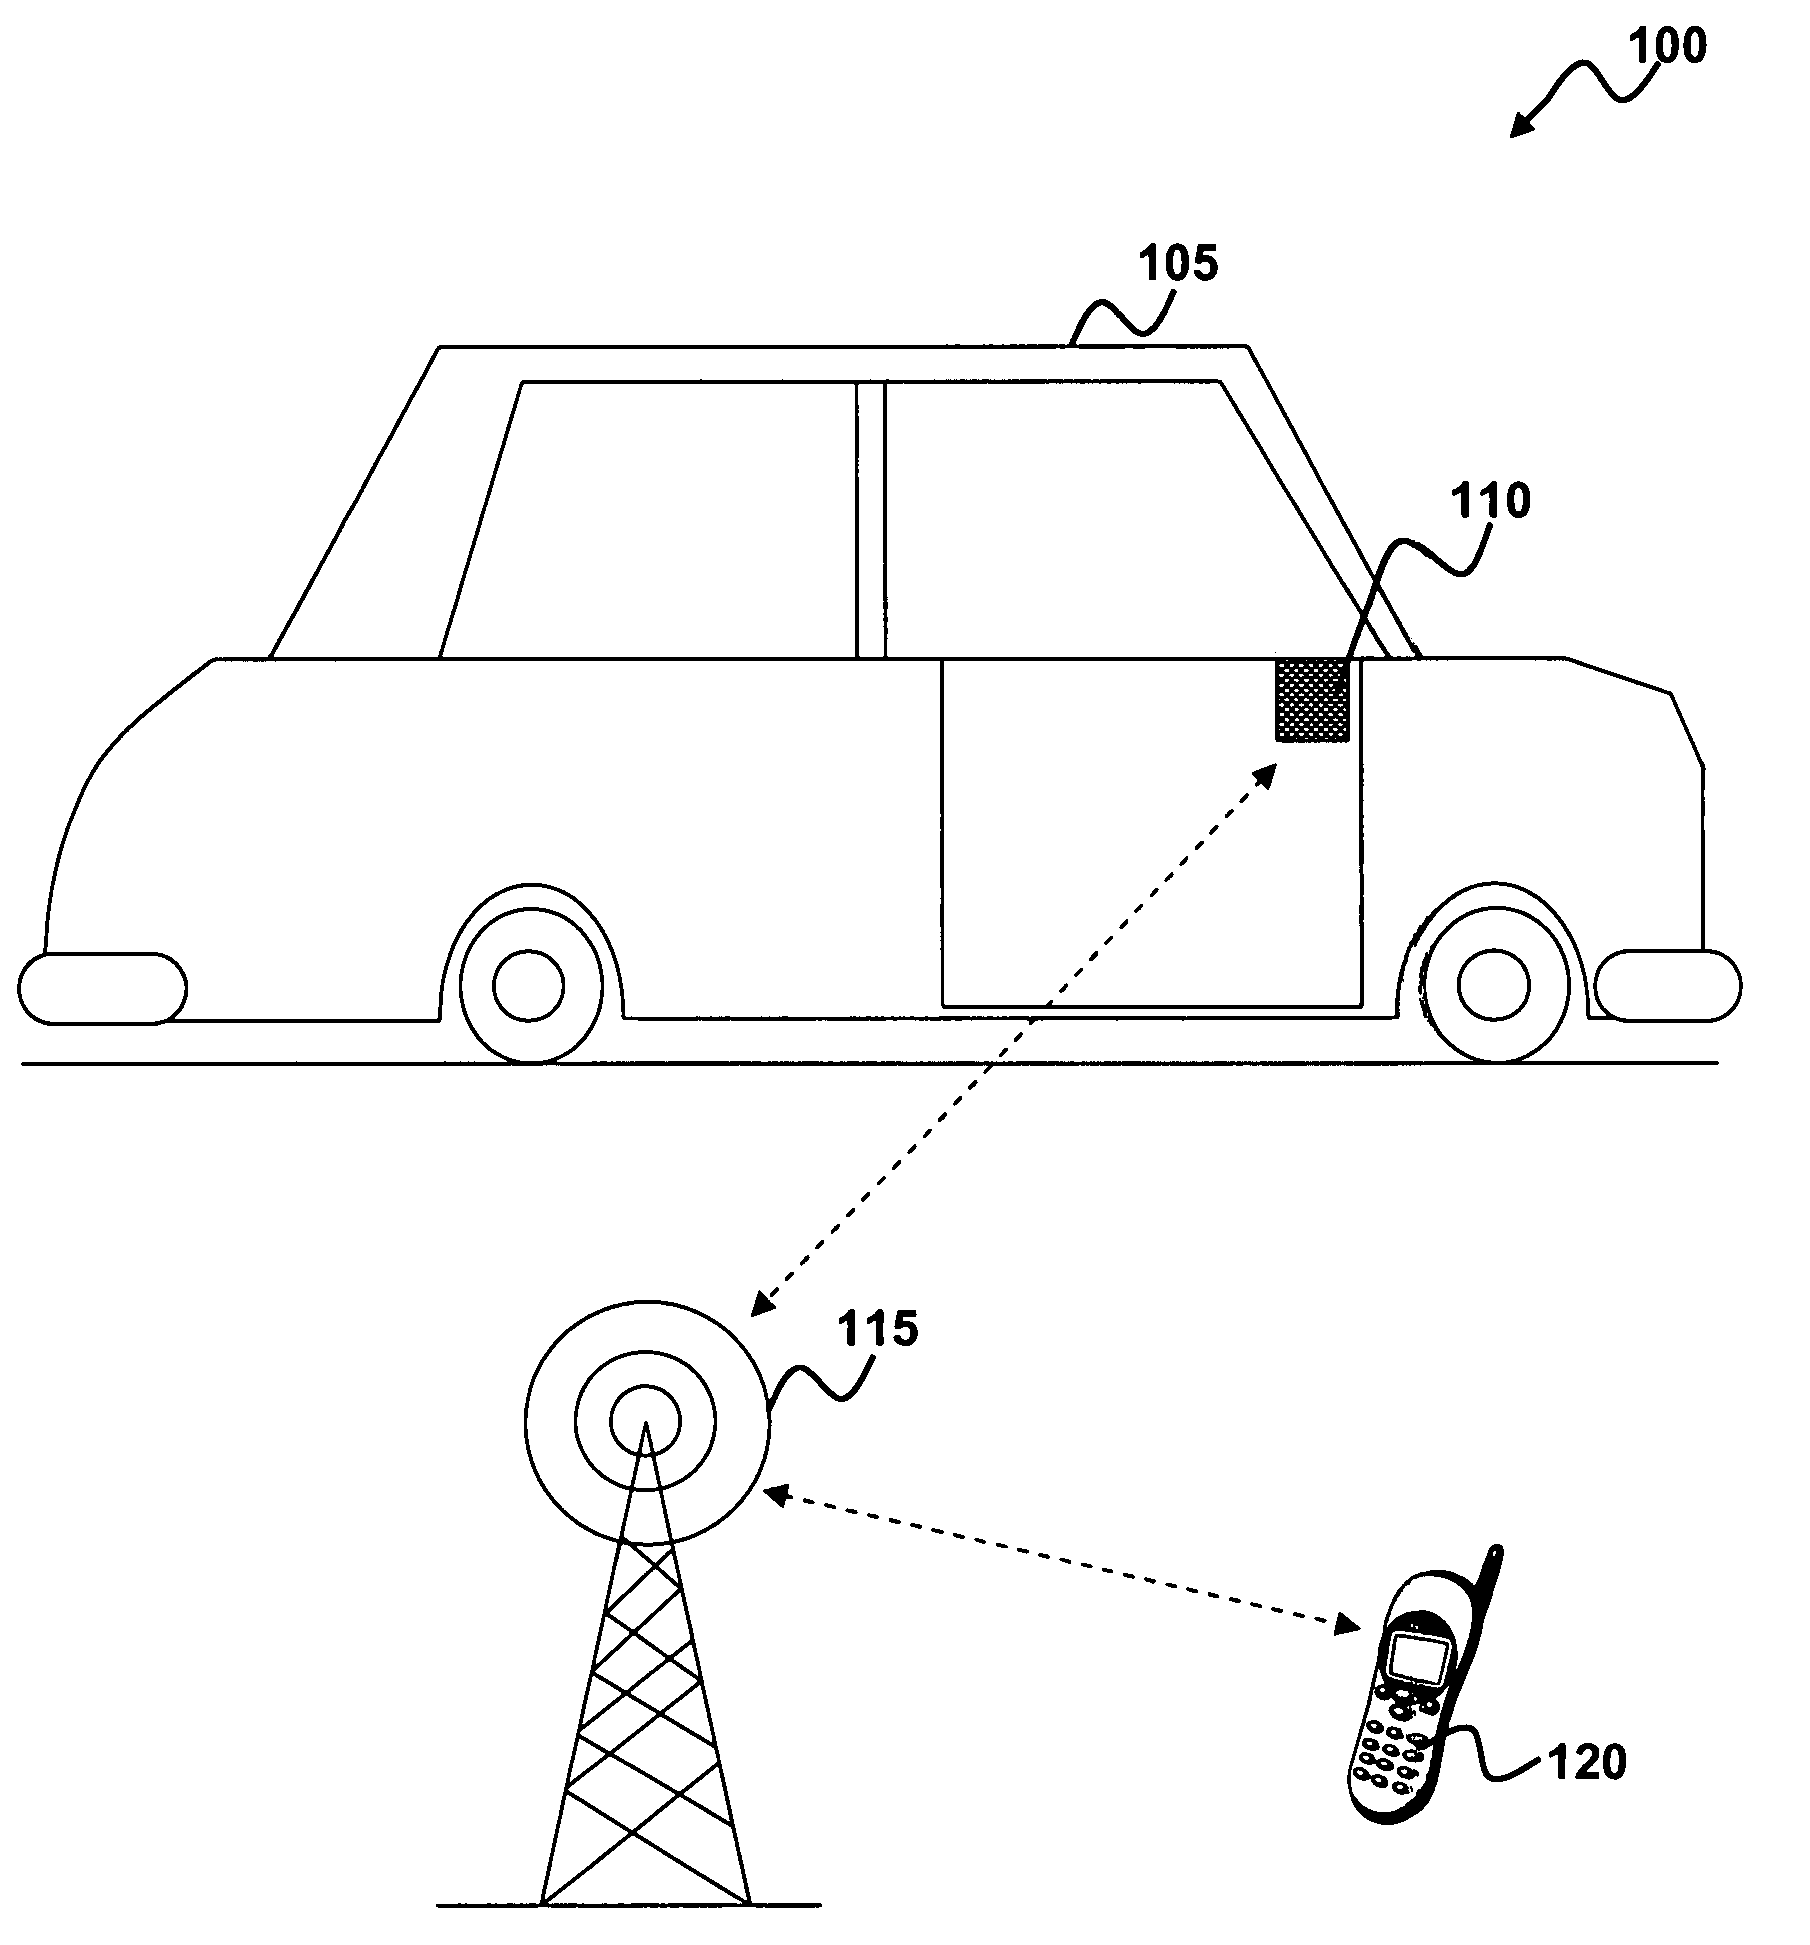 System and method for asset tracking